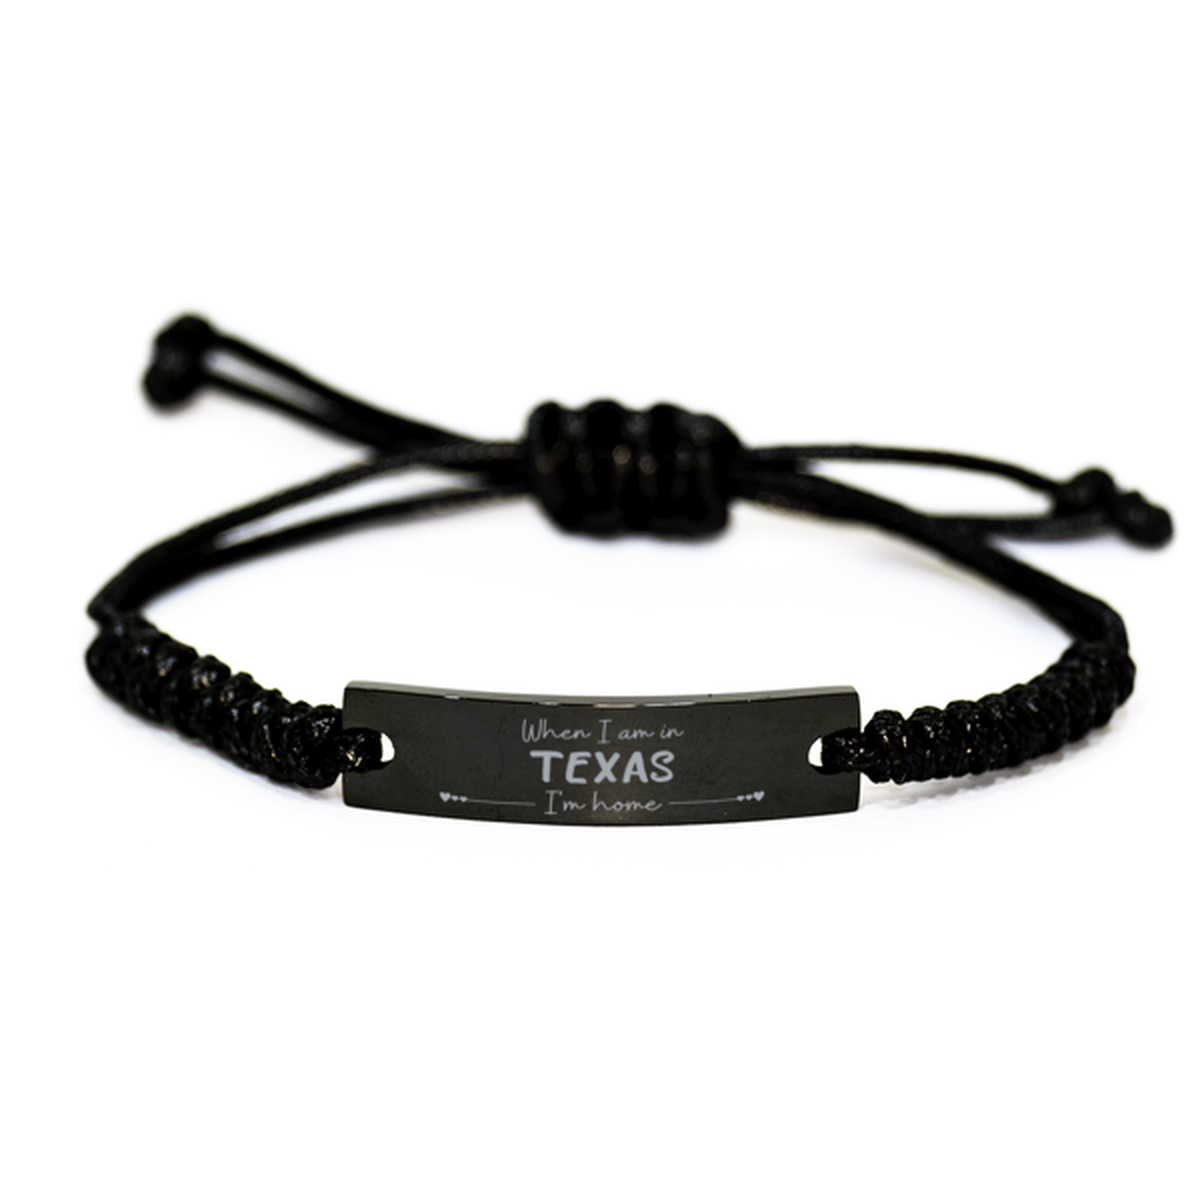 When I am in Texas I'm home Black Rope Bracelet, Cheap Gifts For Texas, State Texas Birthday Gifts for Friends Coworker